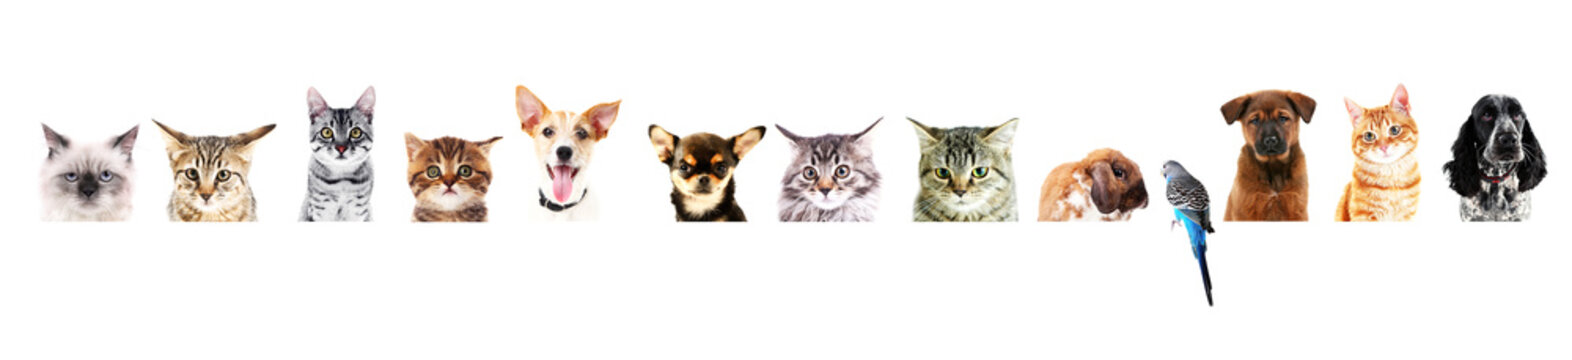 Row Of Different Pets On White Background.